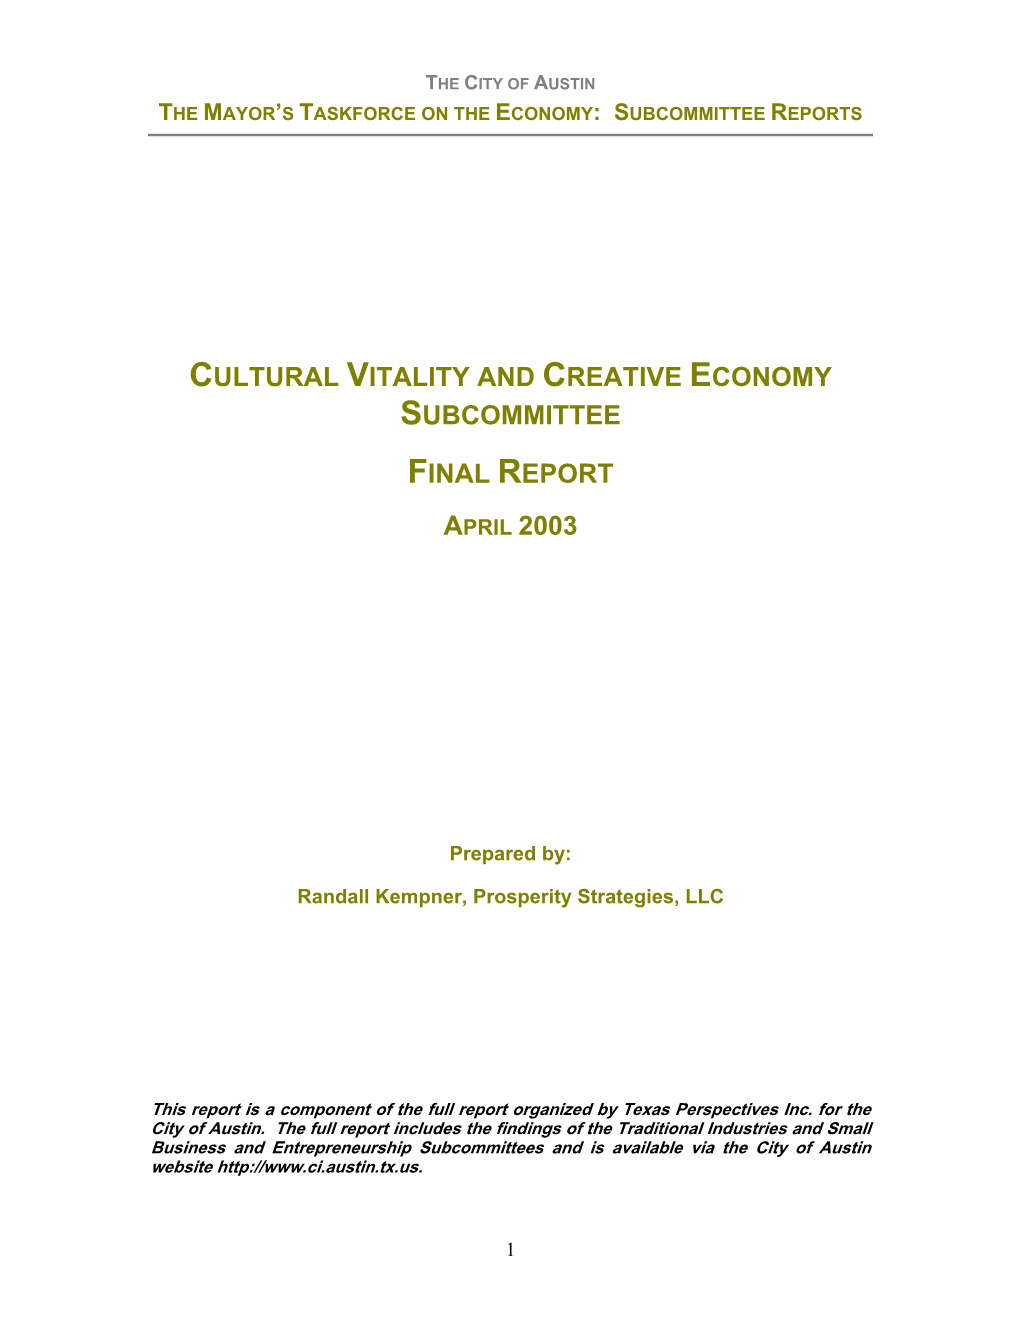 Cultural Vitality and Creative Economy Report